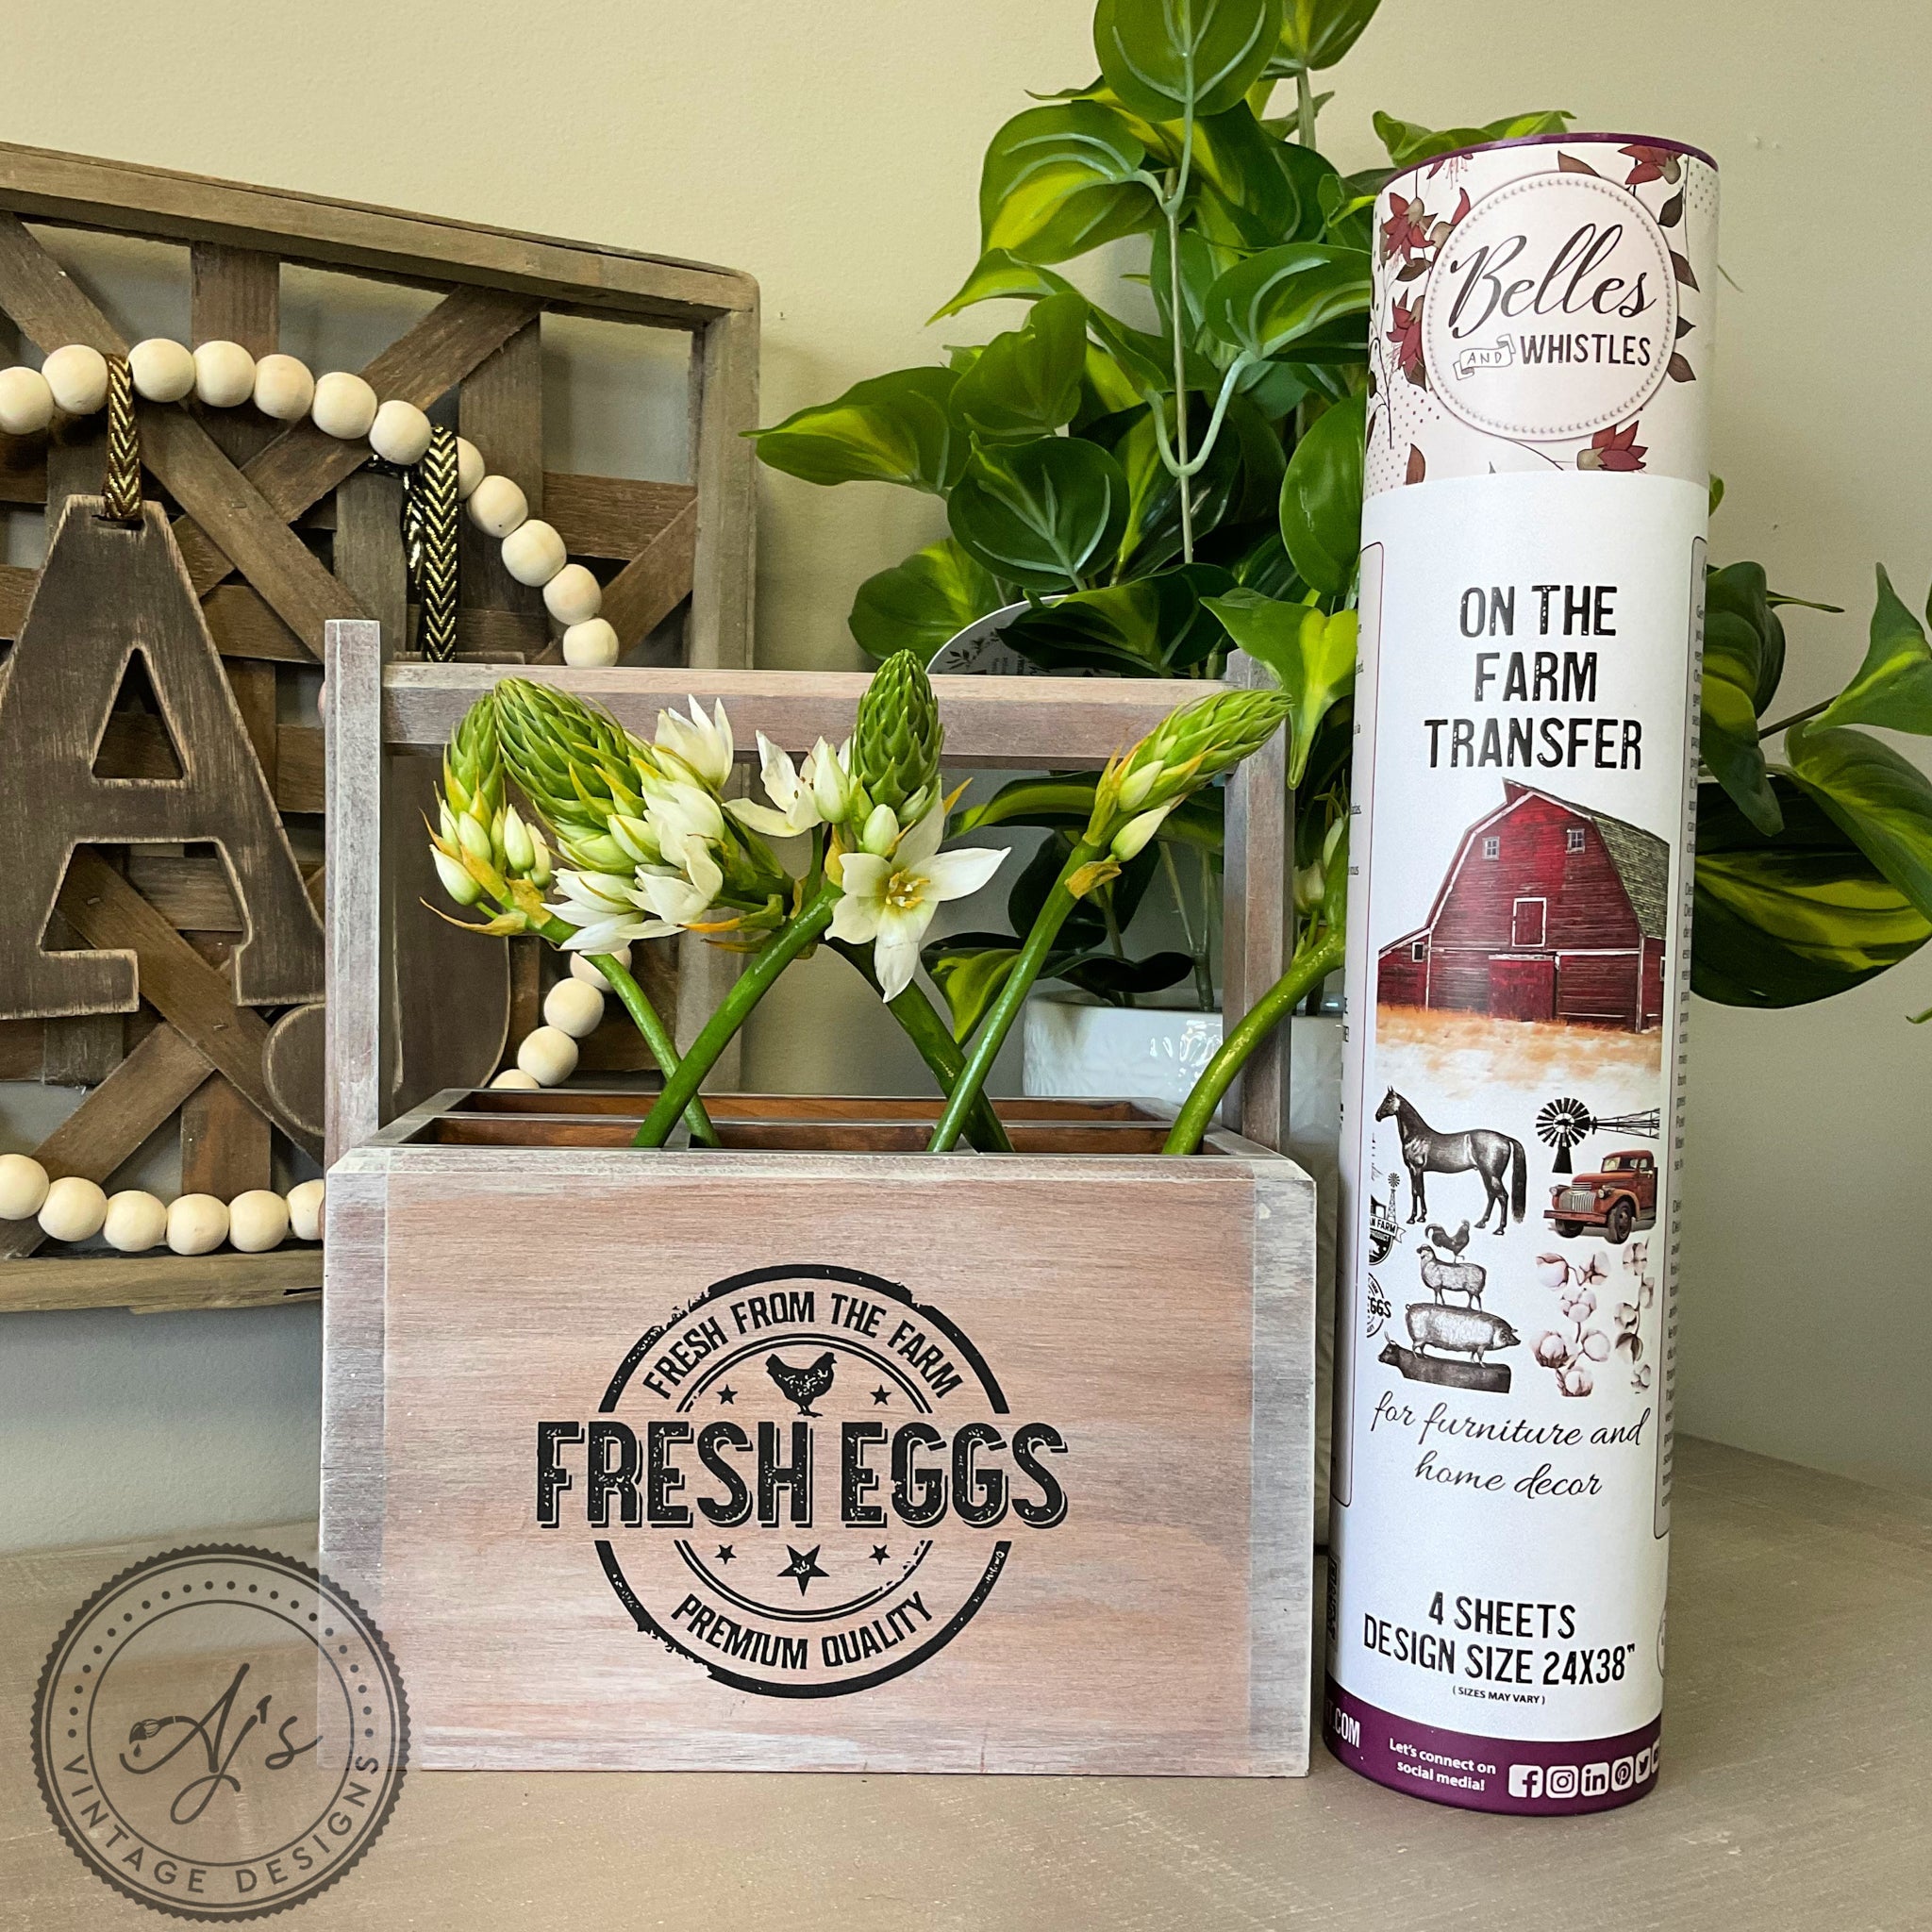 A container for Belles & Whistles On the Farm transfer and a wood tool box refurbished by Aj's Vintage Designs features the Fresh Eggs, Fresh from the Farm Premium Quality transfer on it. 